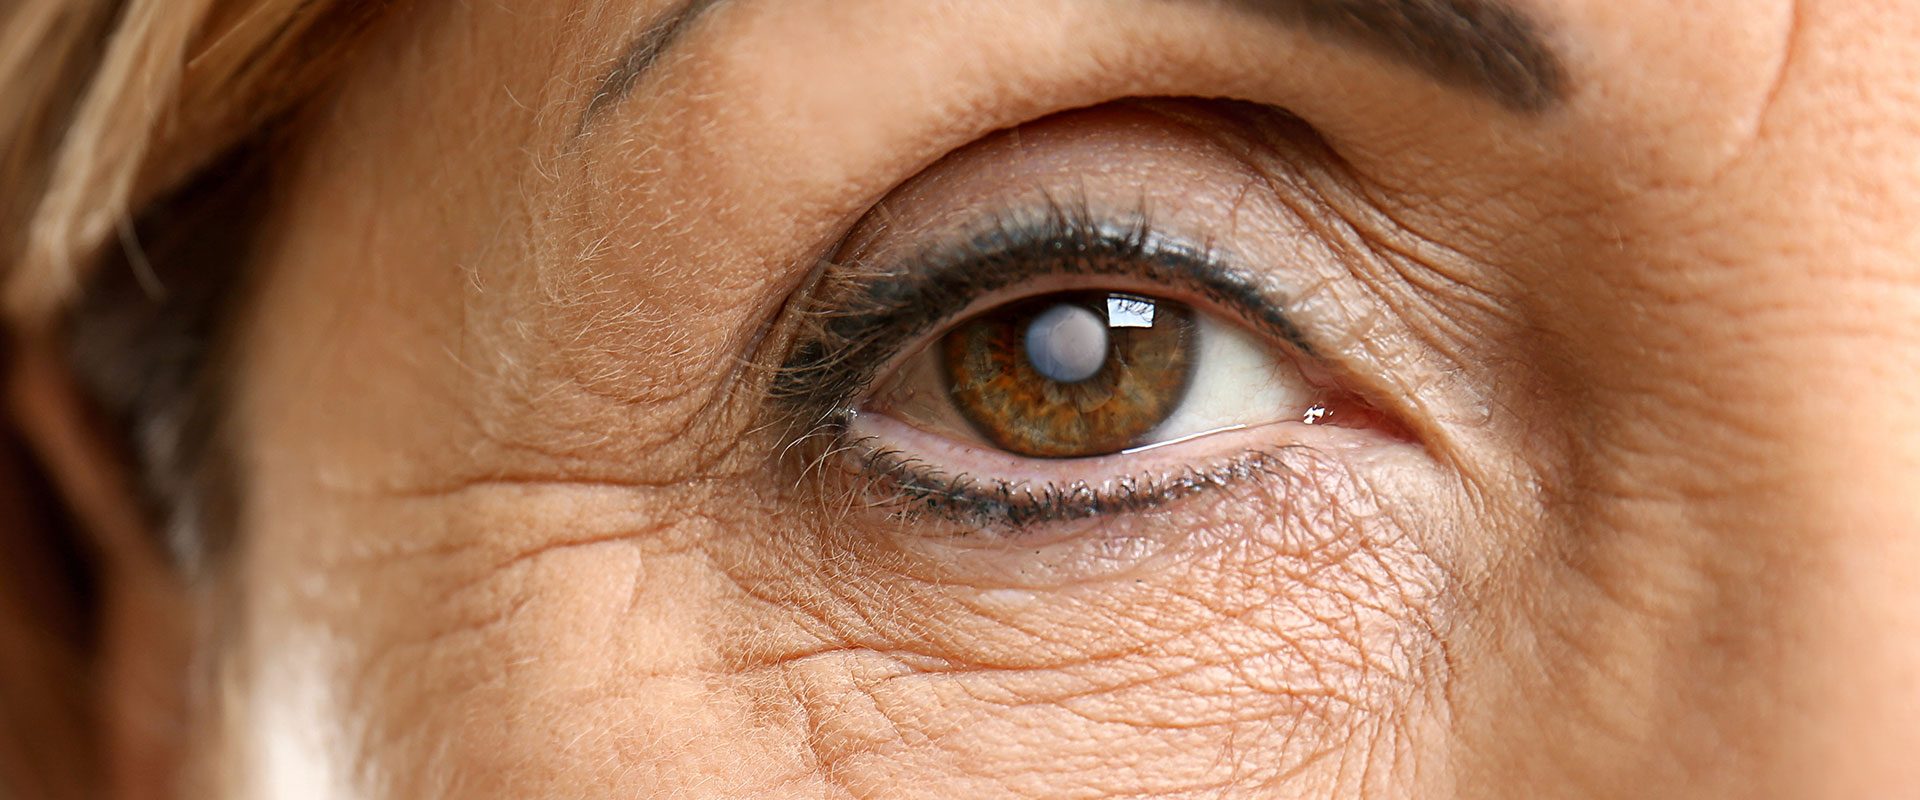 Cataracts Causes Symptoms Common Eye Problems